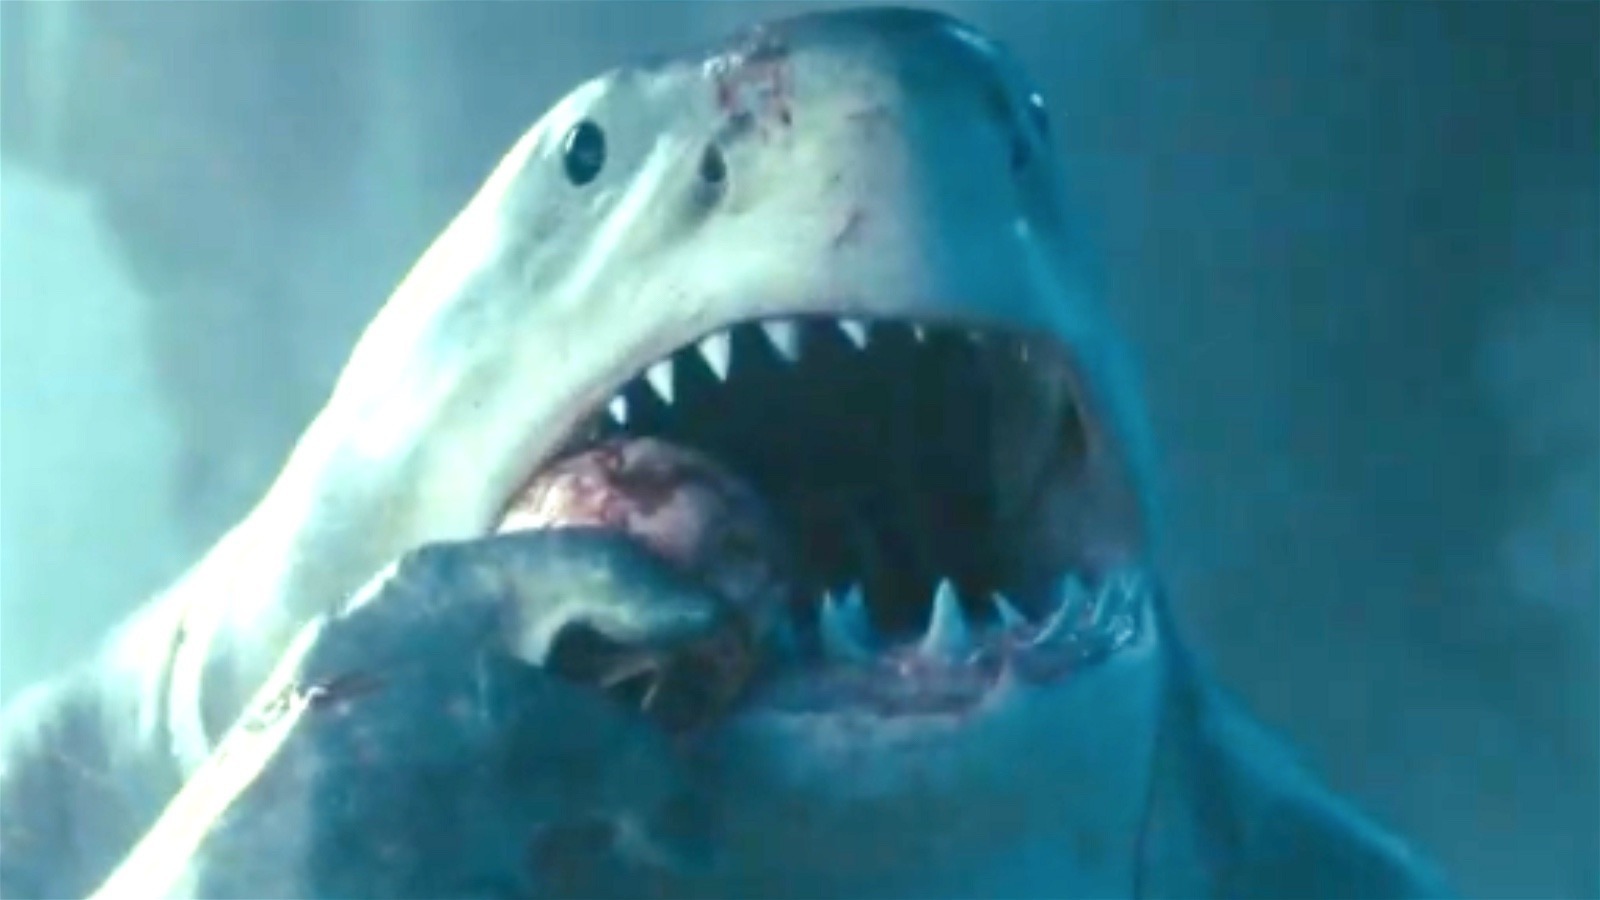 Sylvester Stallone's King Shark Is a Hit With 'Suicide Squad' Fans